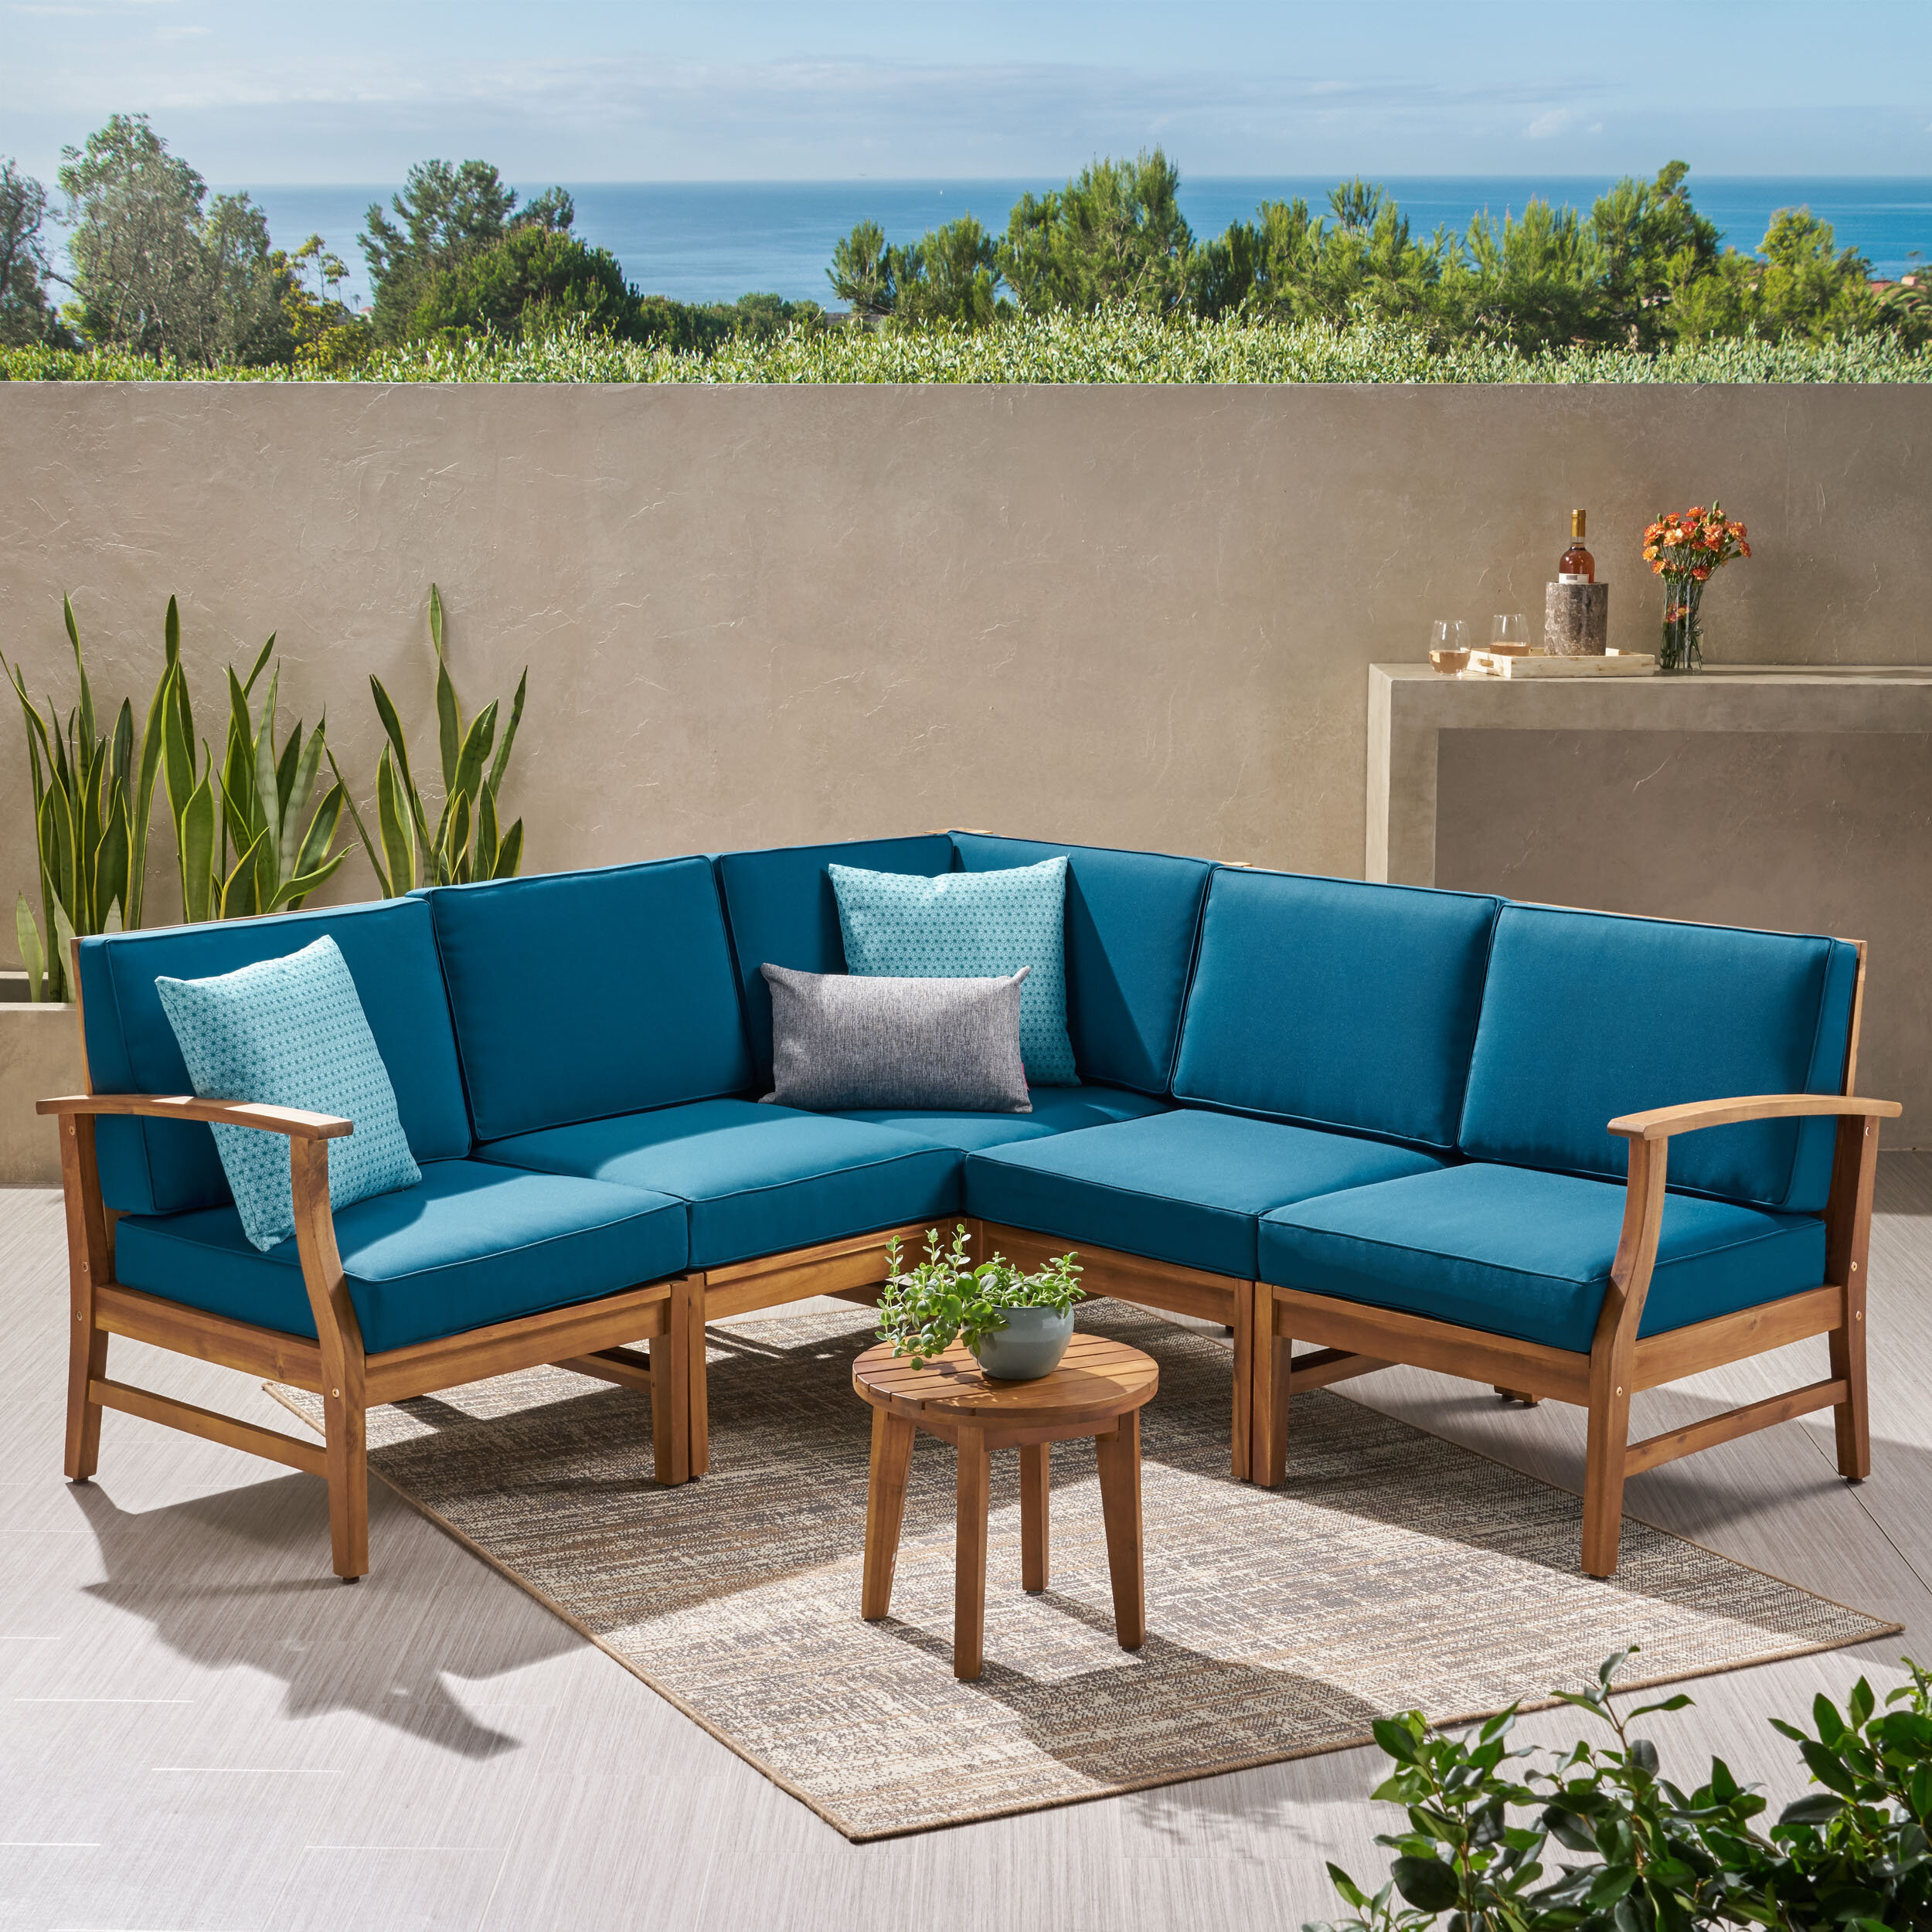 Lund Teak Patio Sectional With Cushions Reviews Joss Main